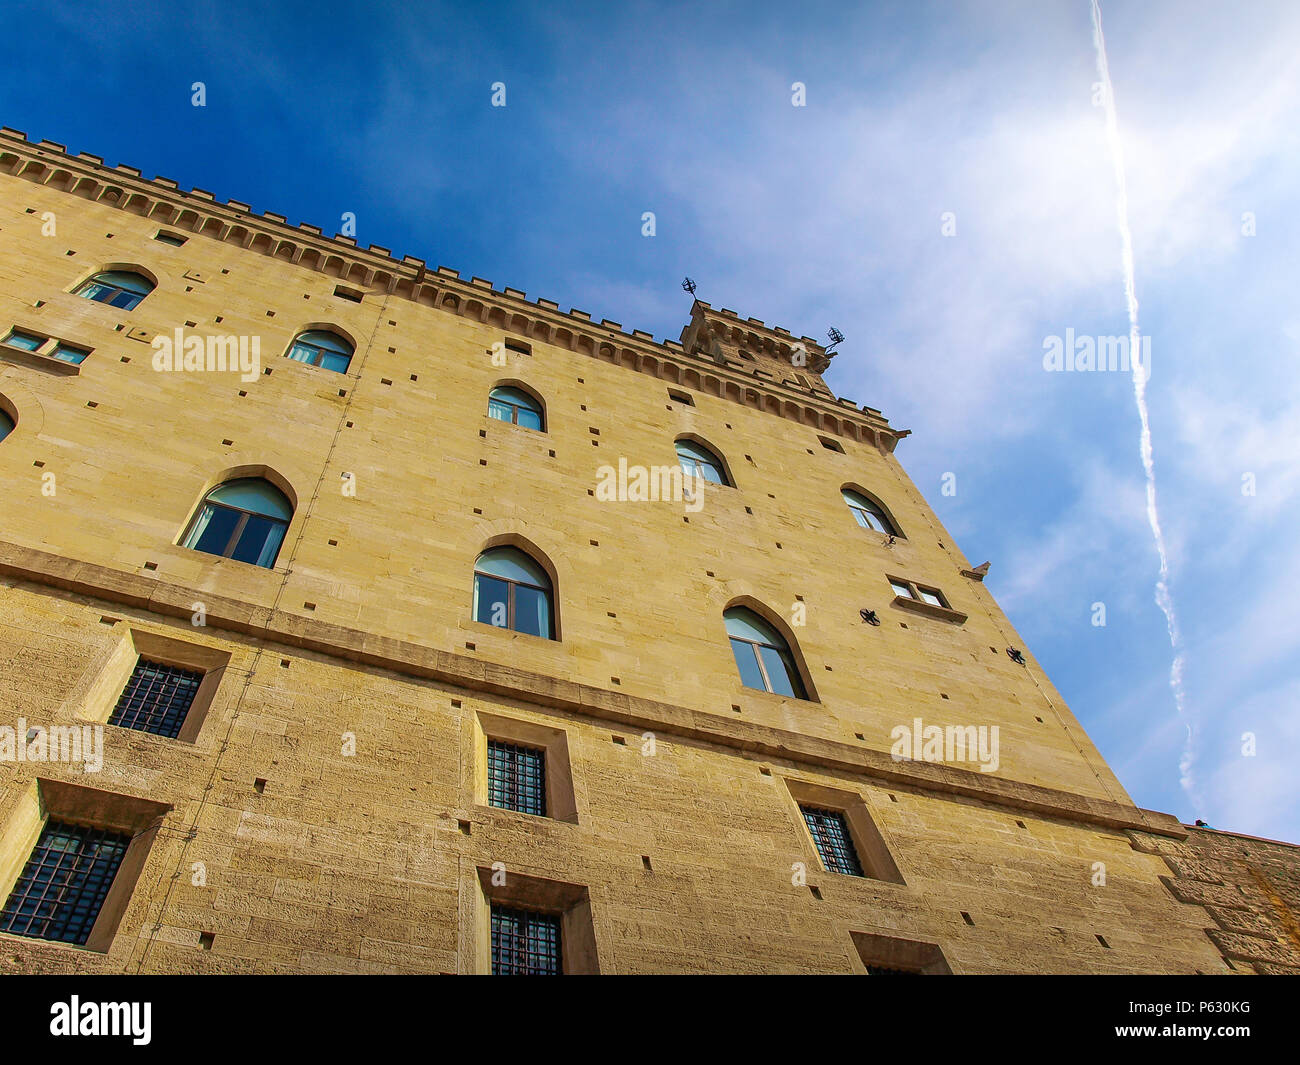 Palazzo Publico - The Public Palace - side view Stock Photo